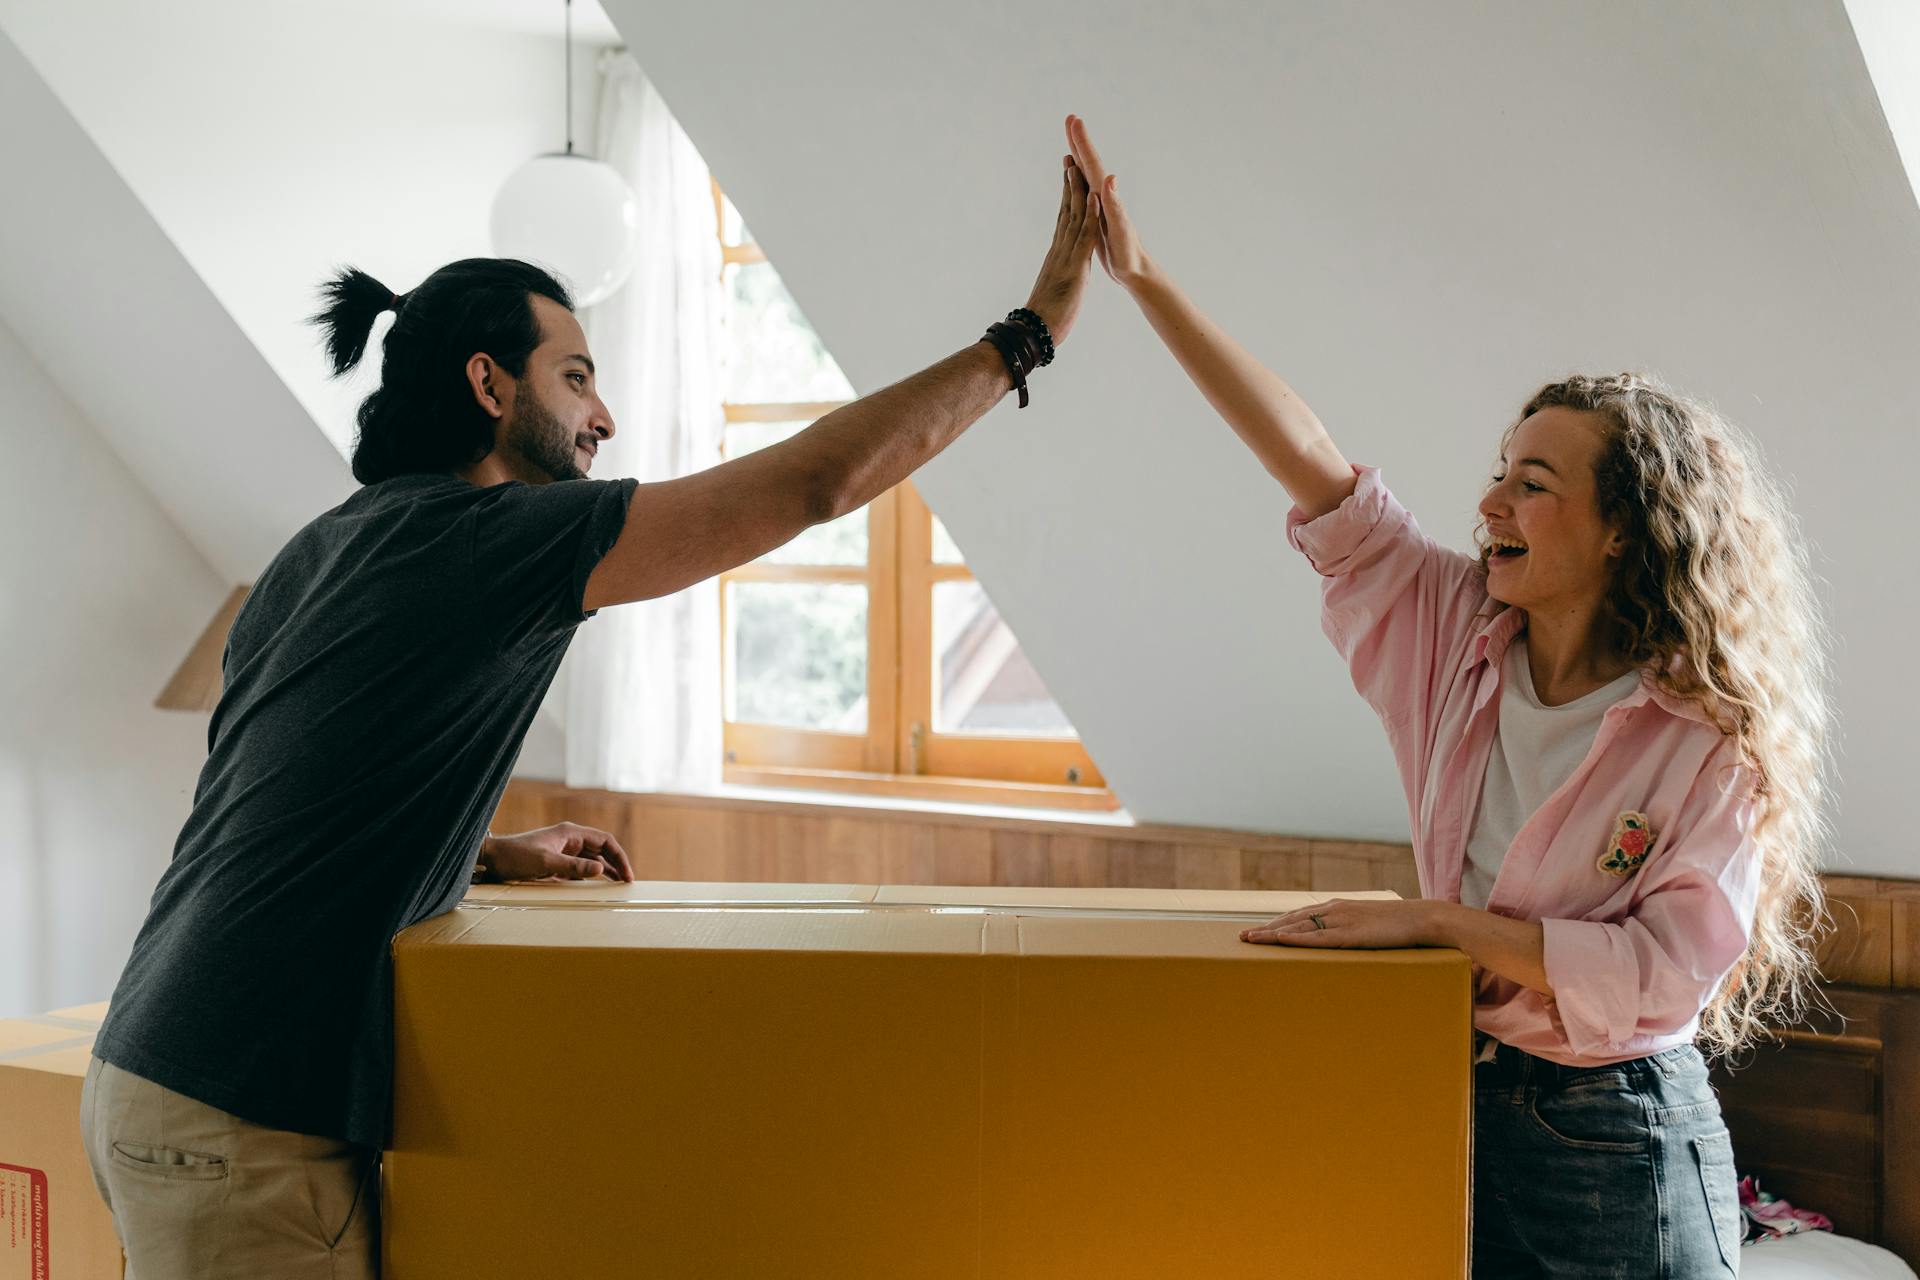 Two people sharing a high-five | Source: Pexels